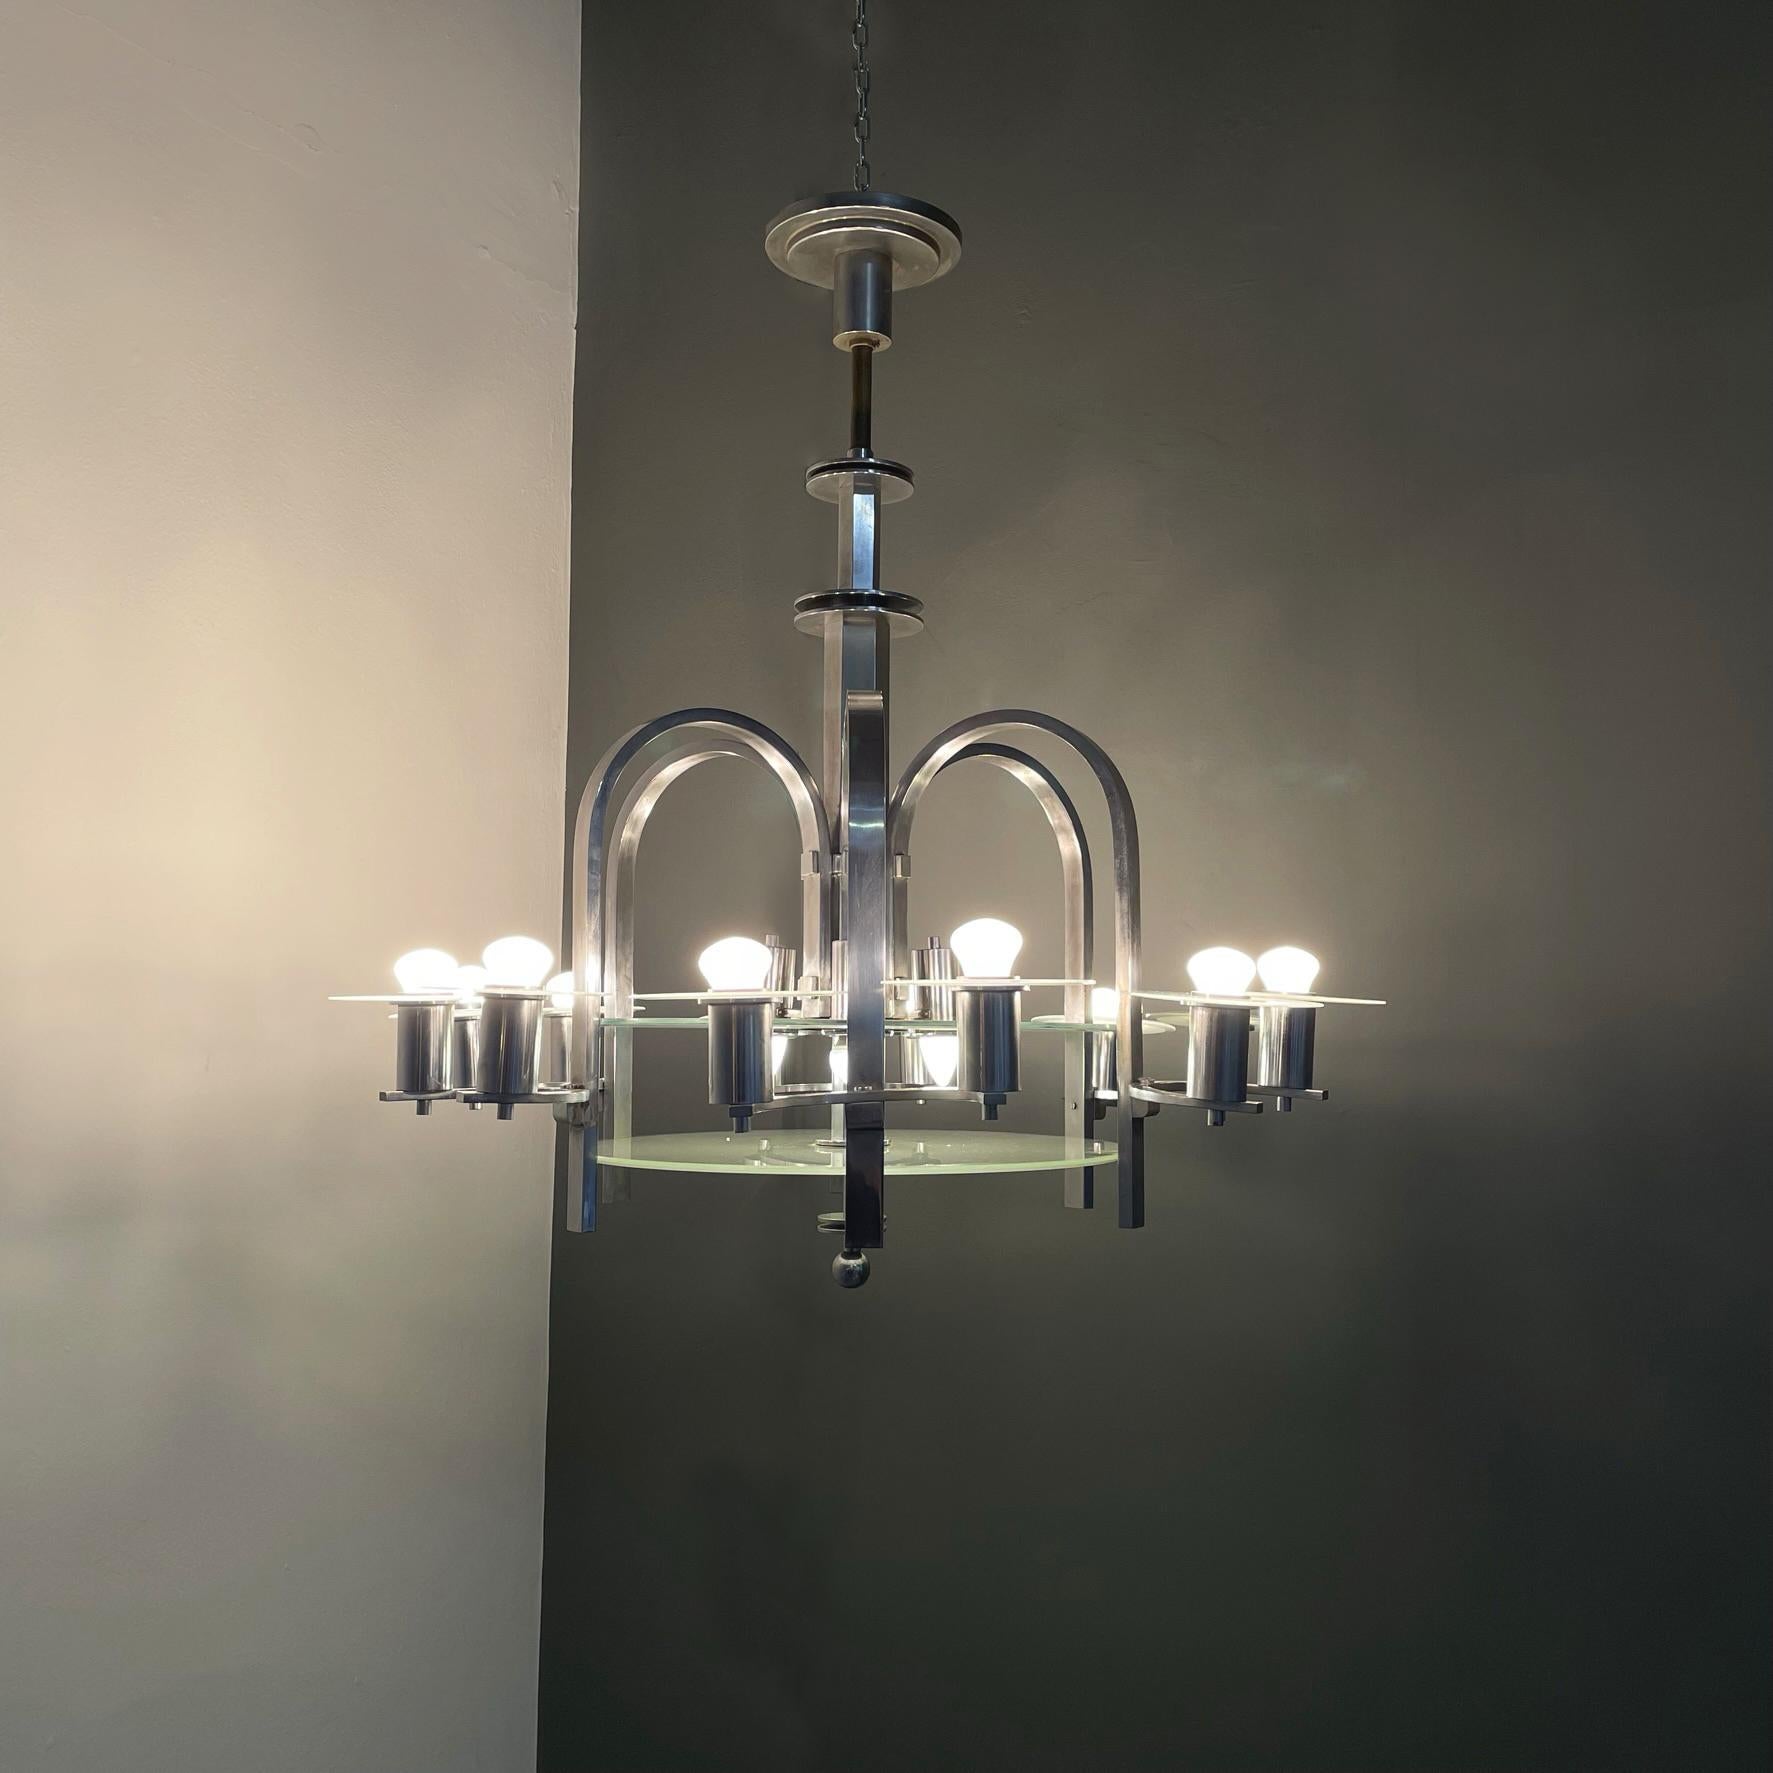 Austrian Art Deco Chandelier with twelve lights in metal and glass, 1920s
Chandelier with twelve lights in chromed steel and transparent and opaque glass. The central structure in metal with a square section has two discs in transparent and opaque